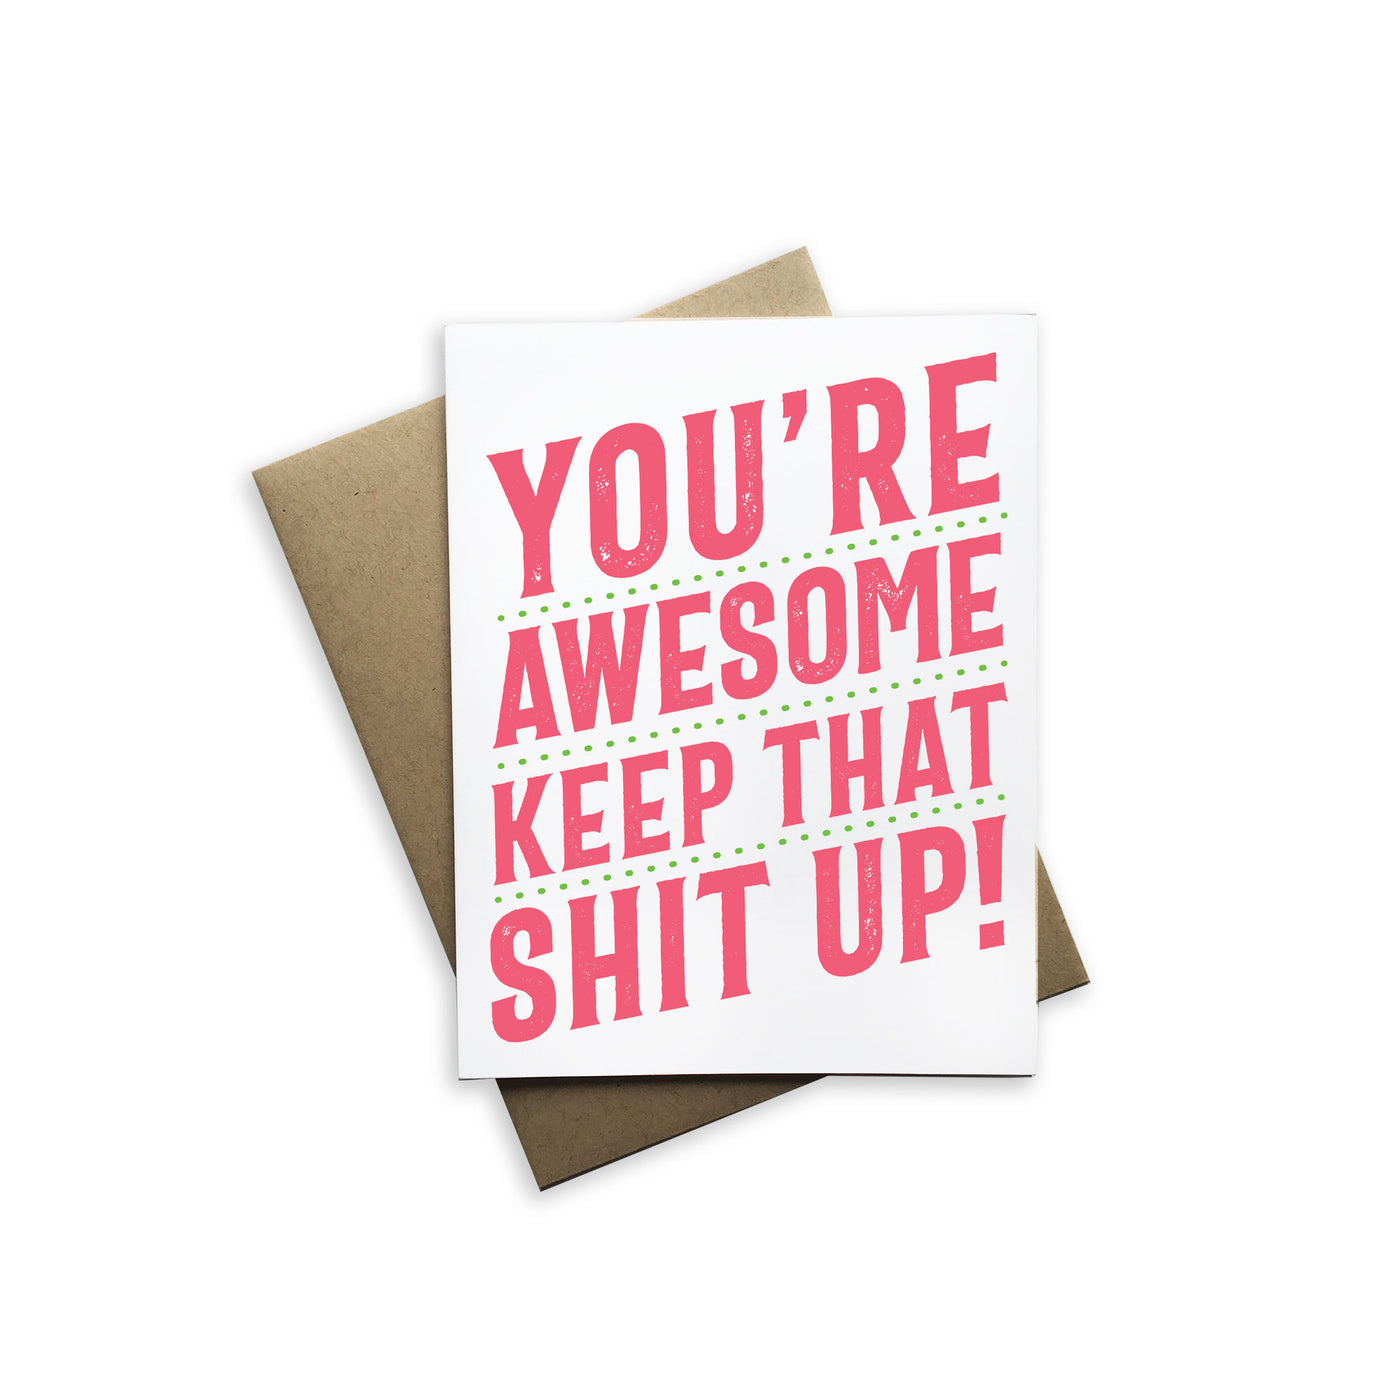 You're Awesome Keep that Shit Up